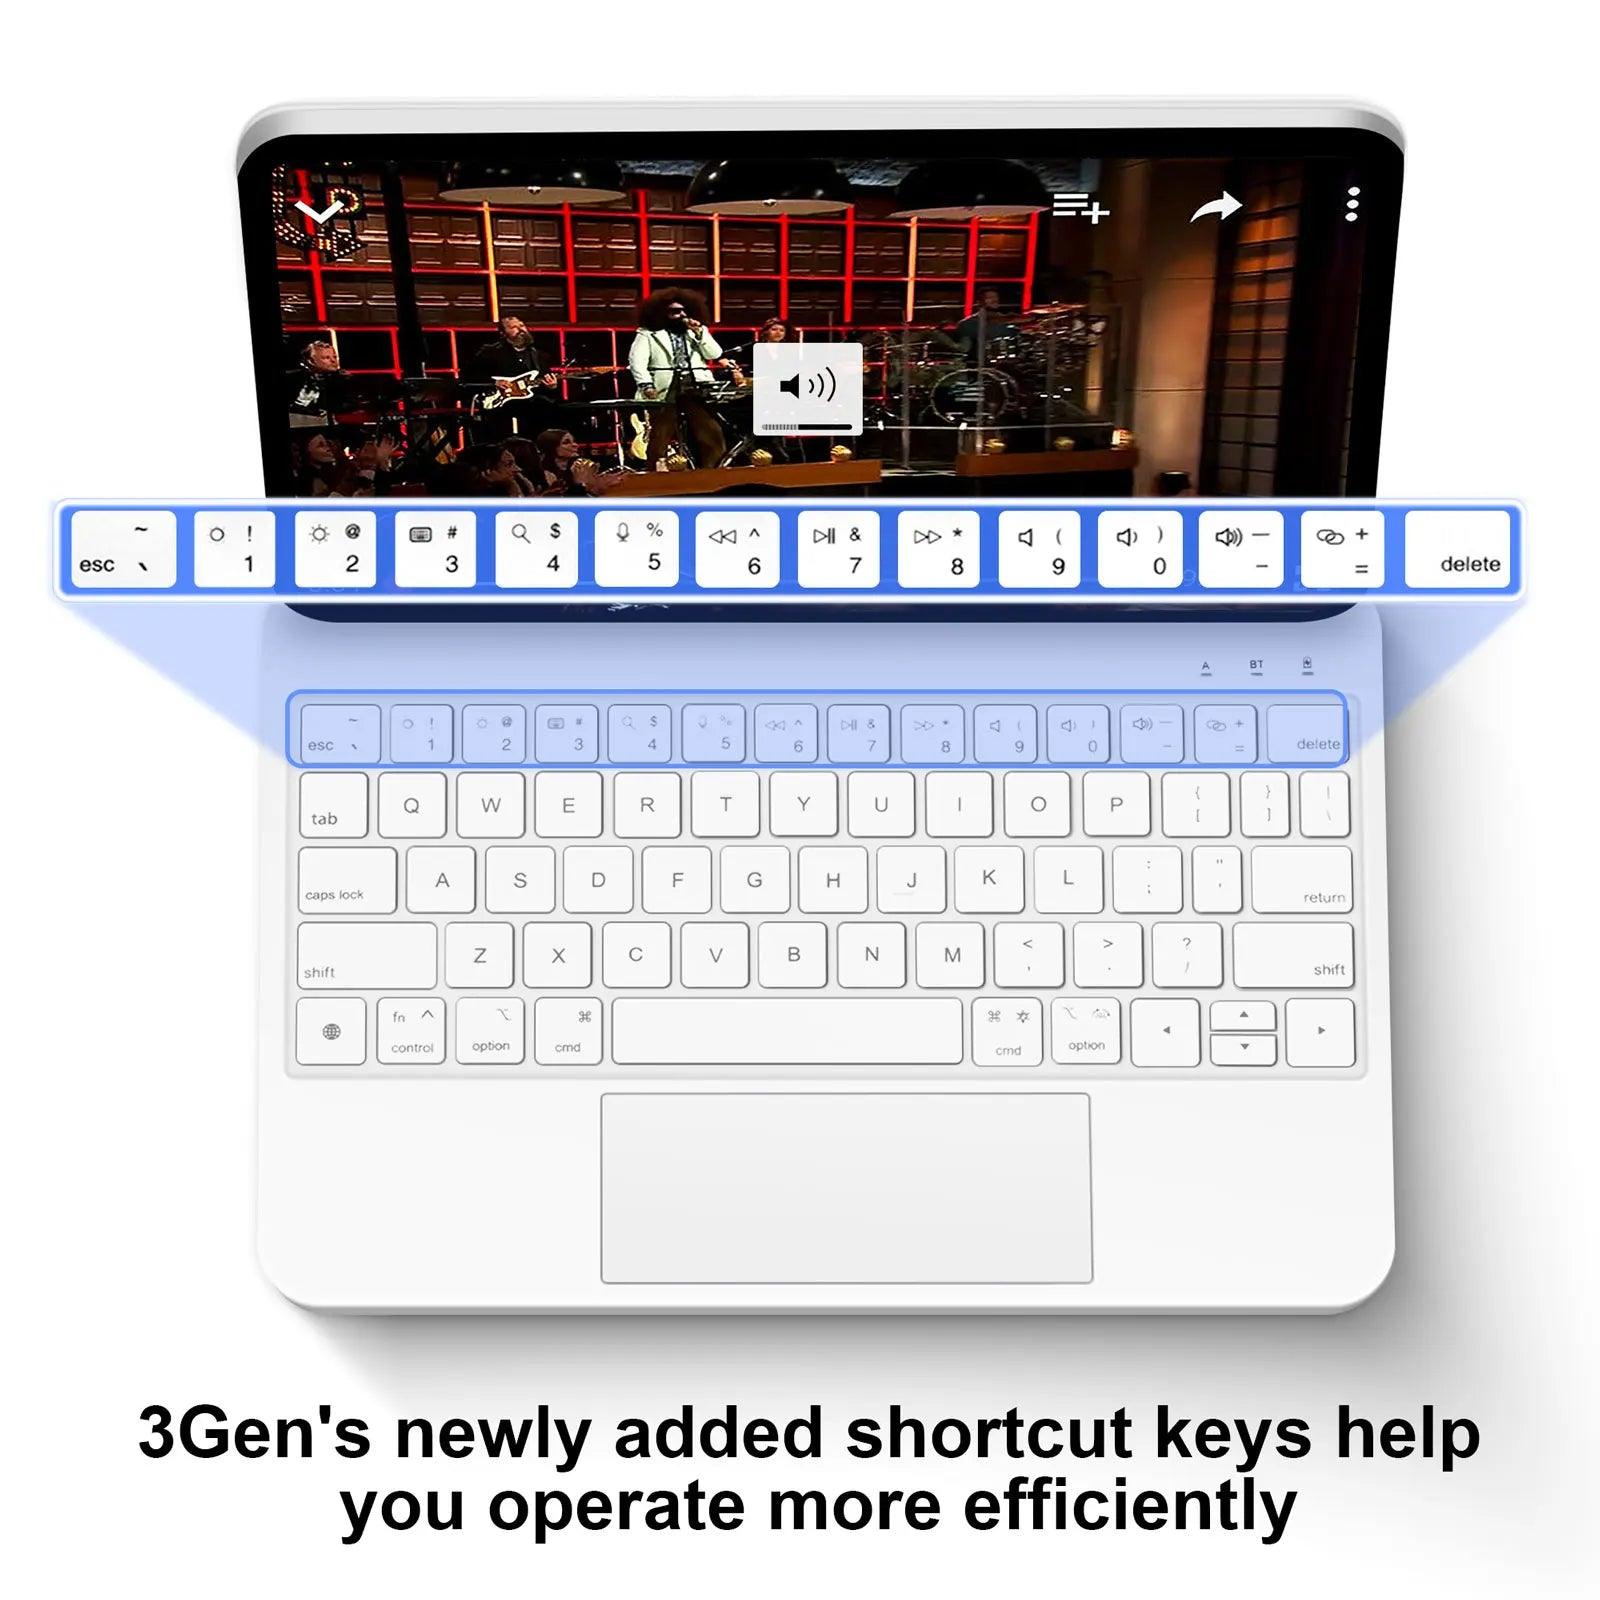 Magic Keyboard for iPad Pro - The Cozy Cubicle